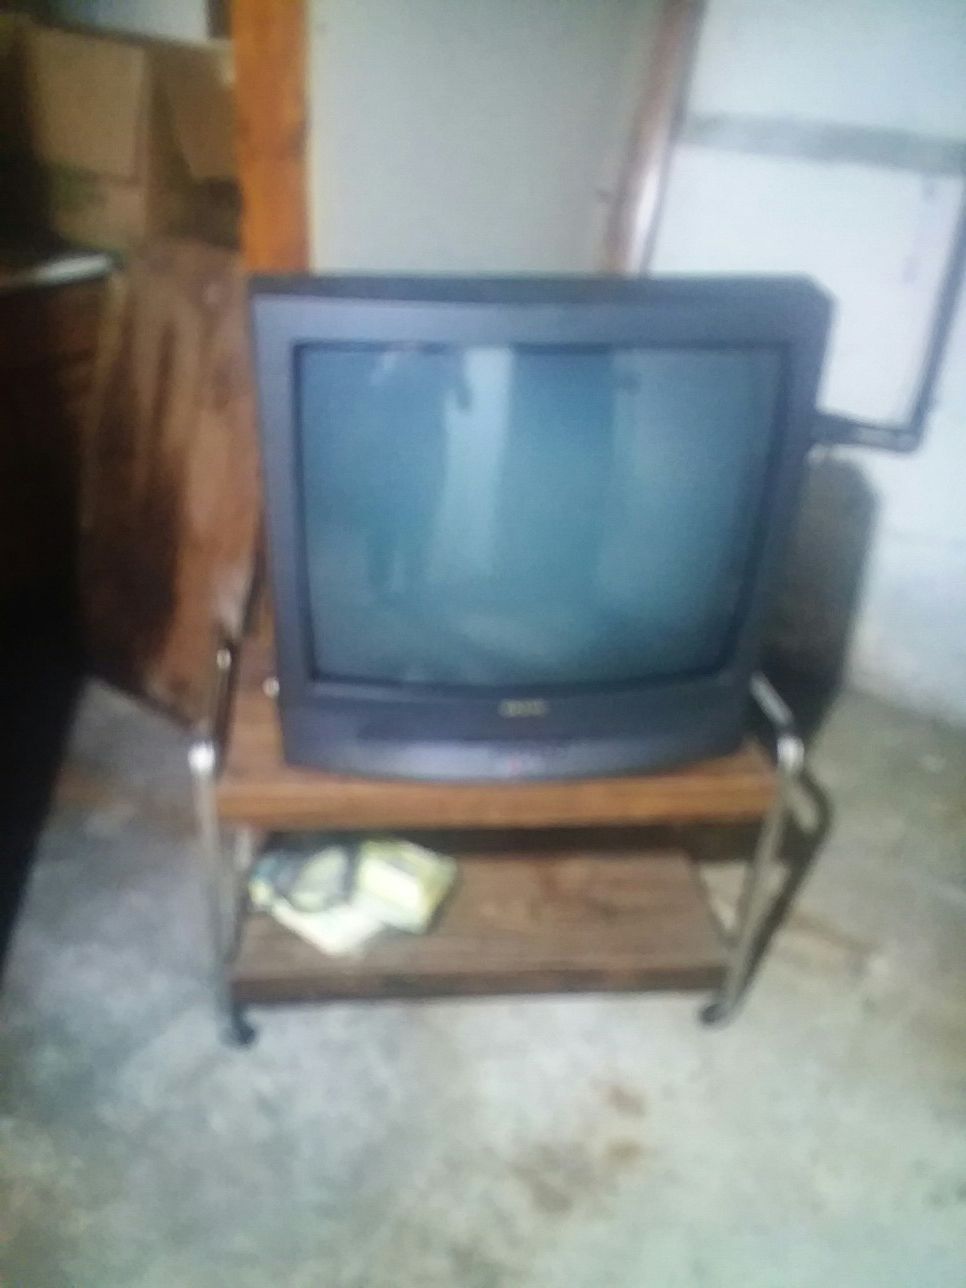 Tv with remote, and or stand